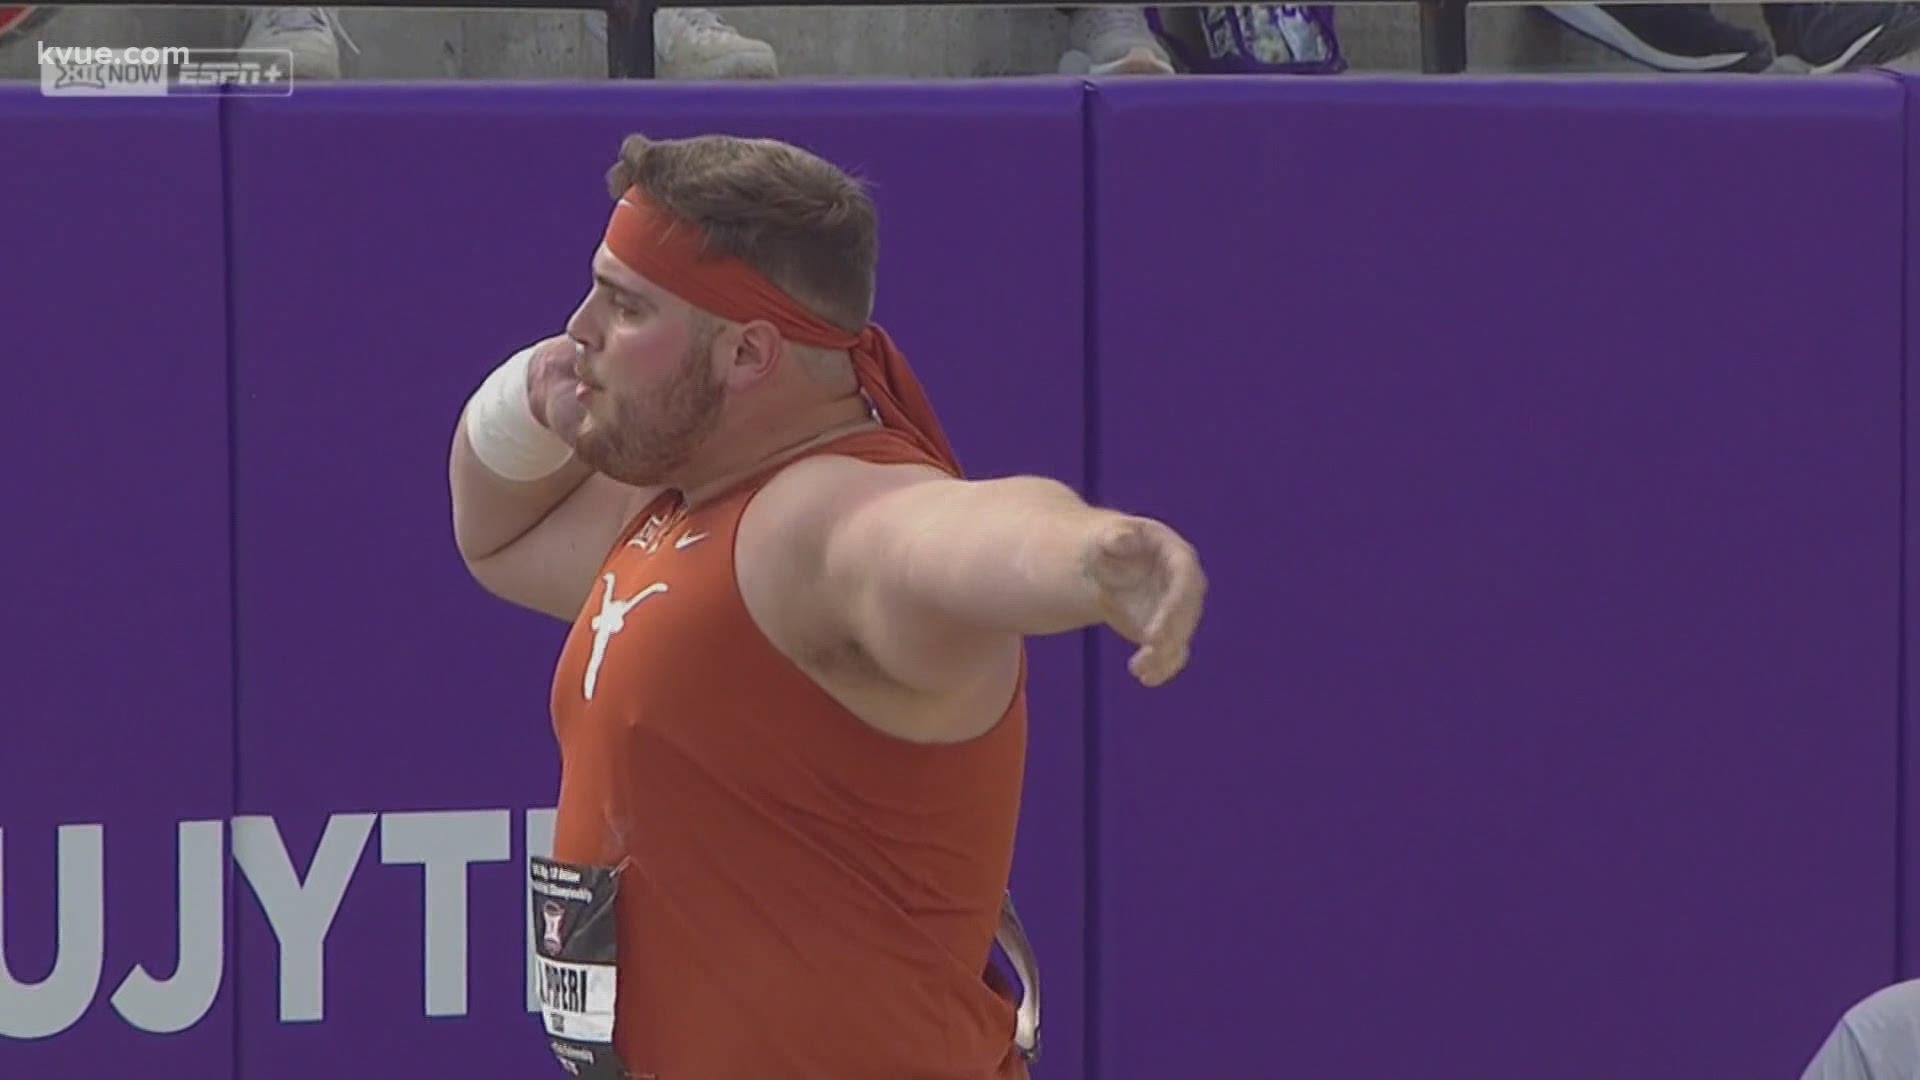 Texas shot put star Tripp Piperi won a seventh Big 12 championship with his first competitive throw since he had ankle surgery two months ago.